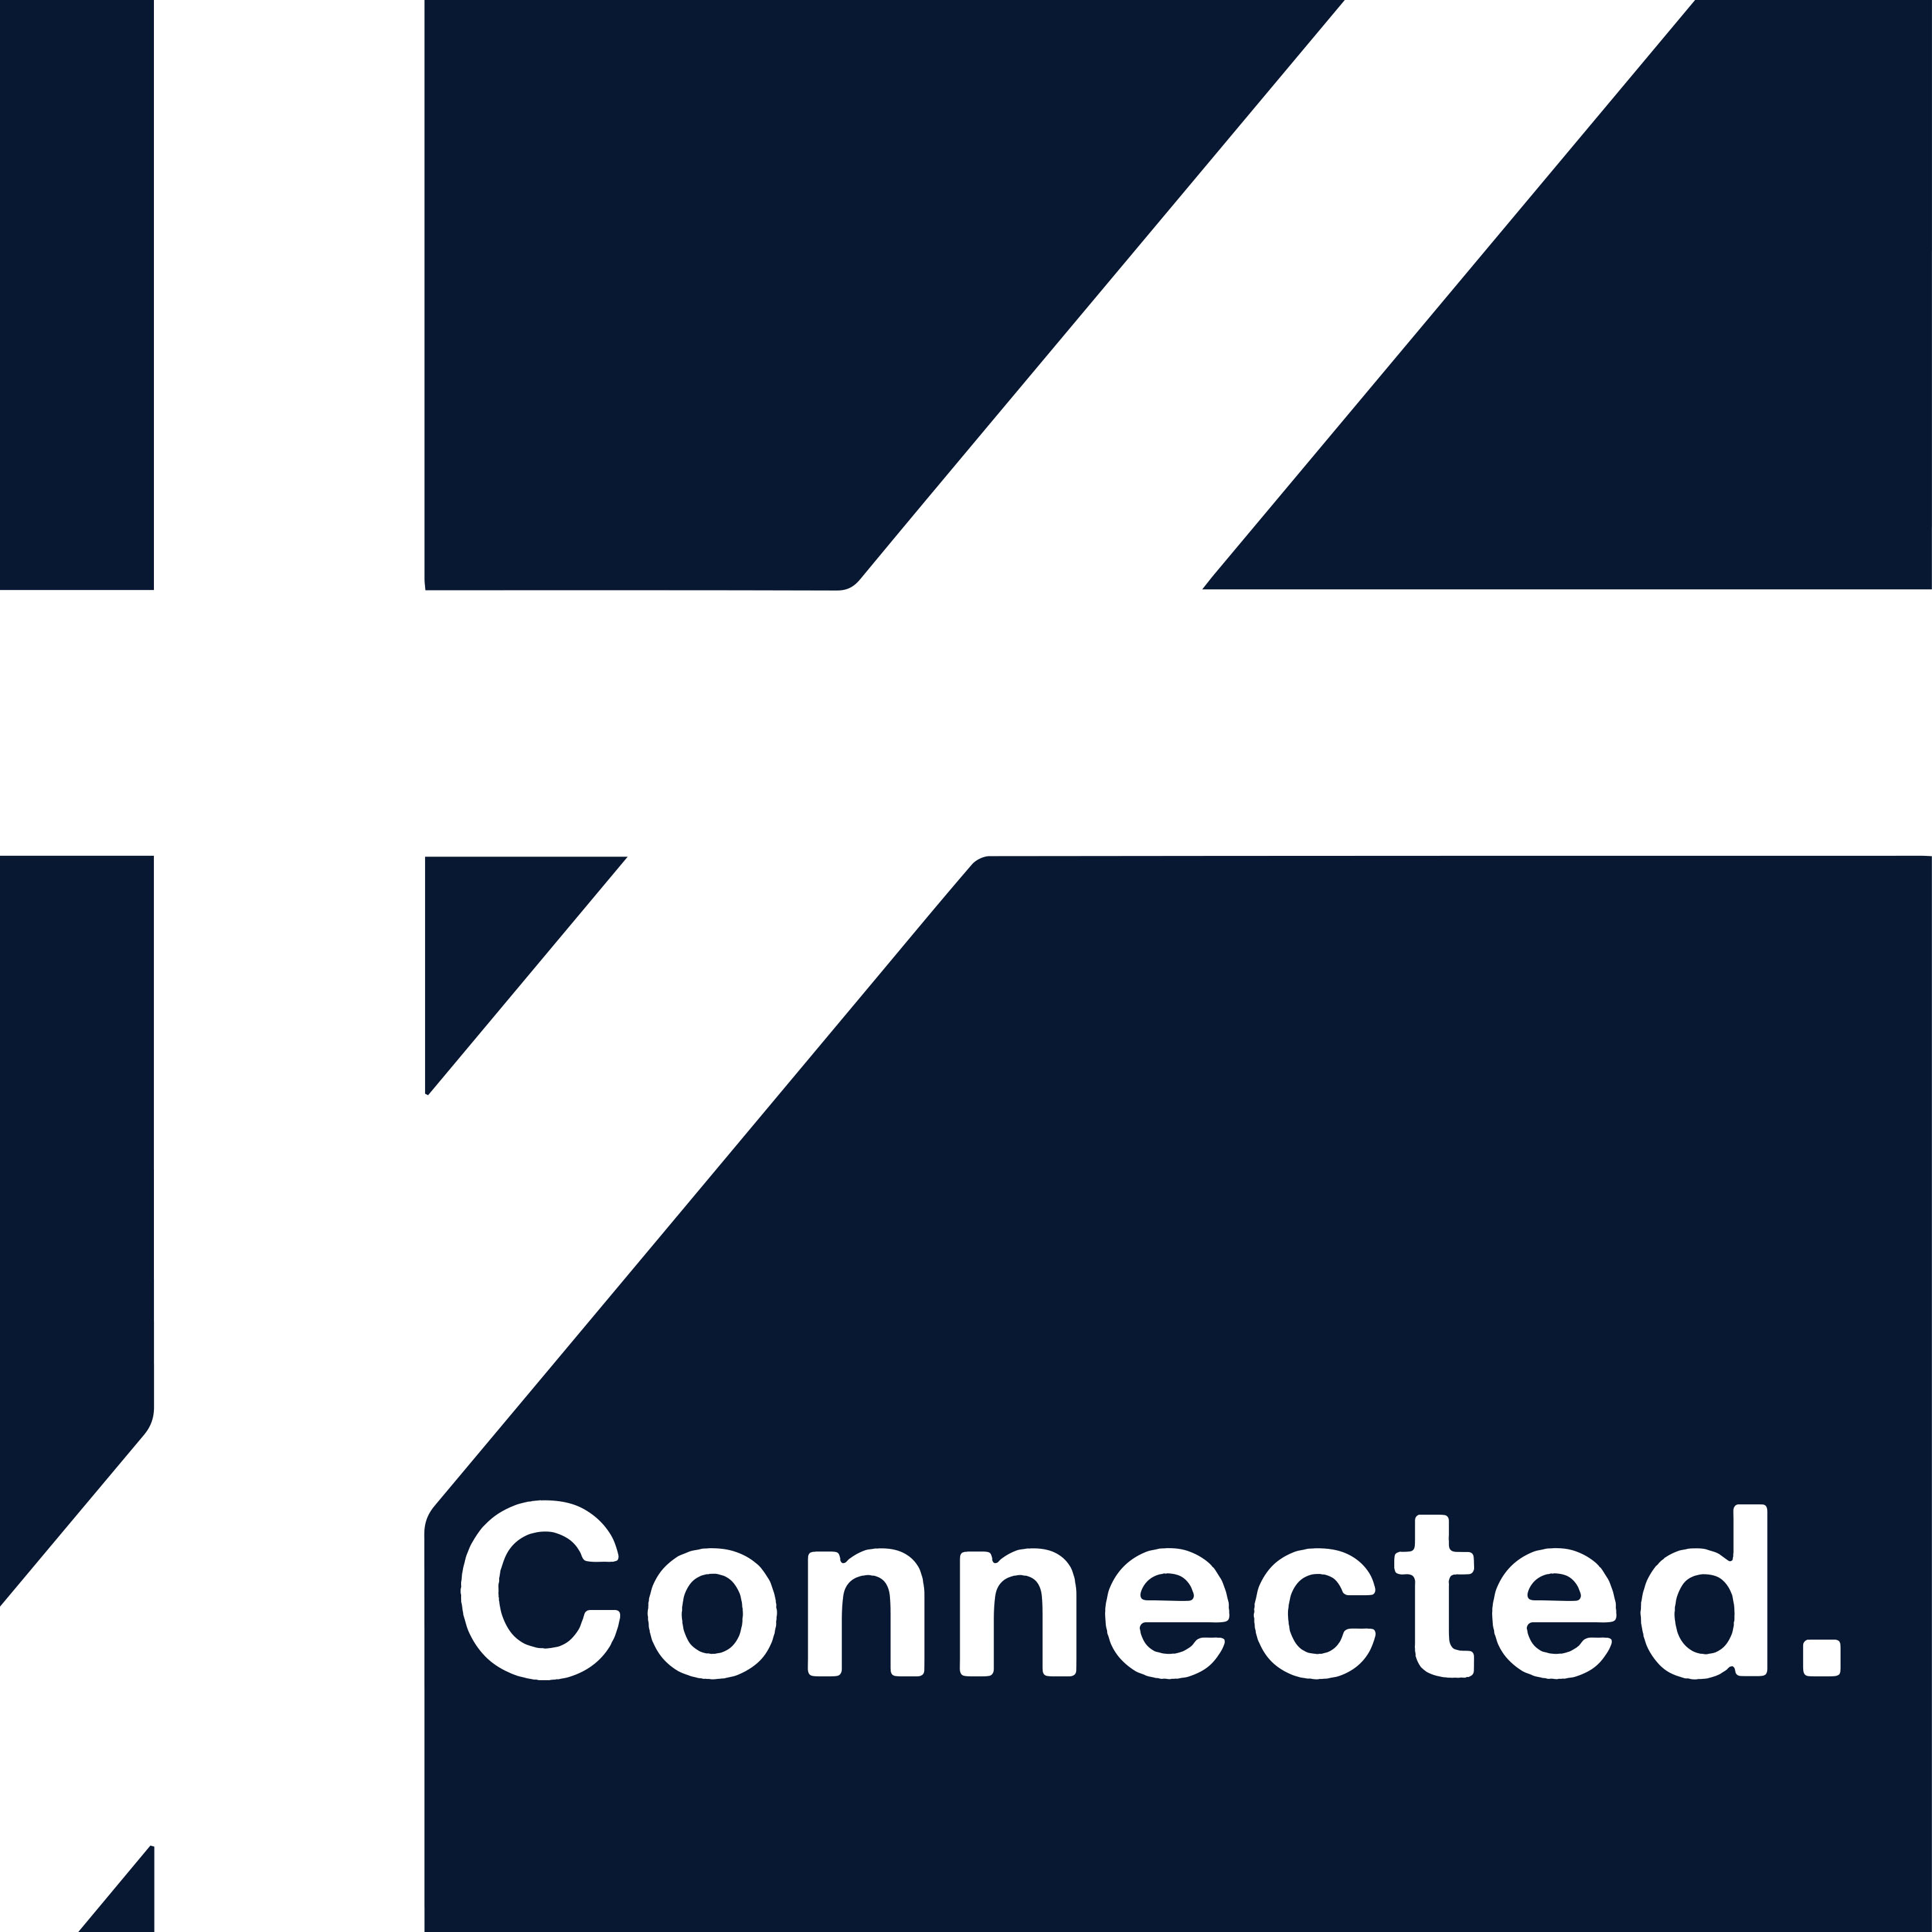 Artwork for Connected.